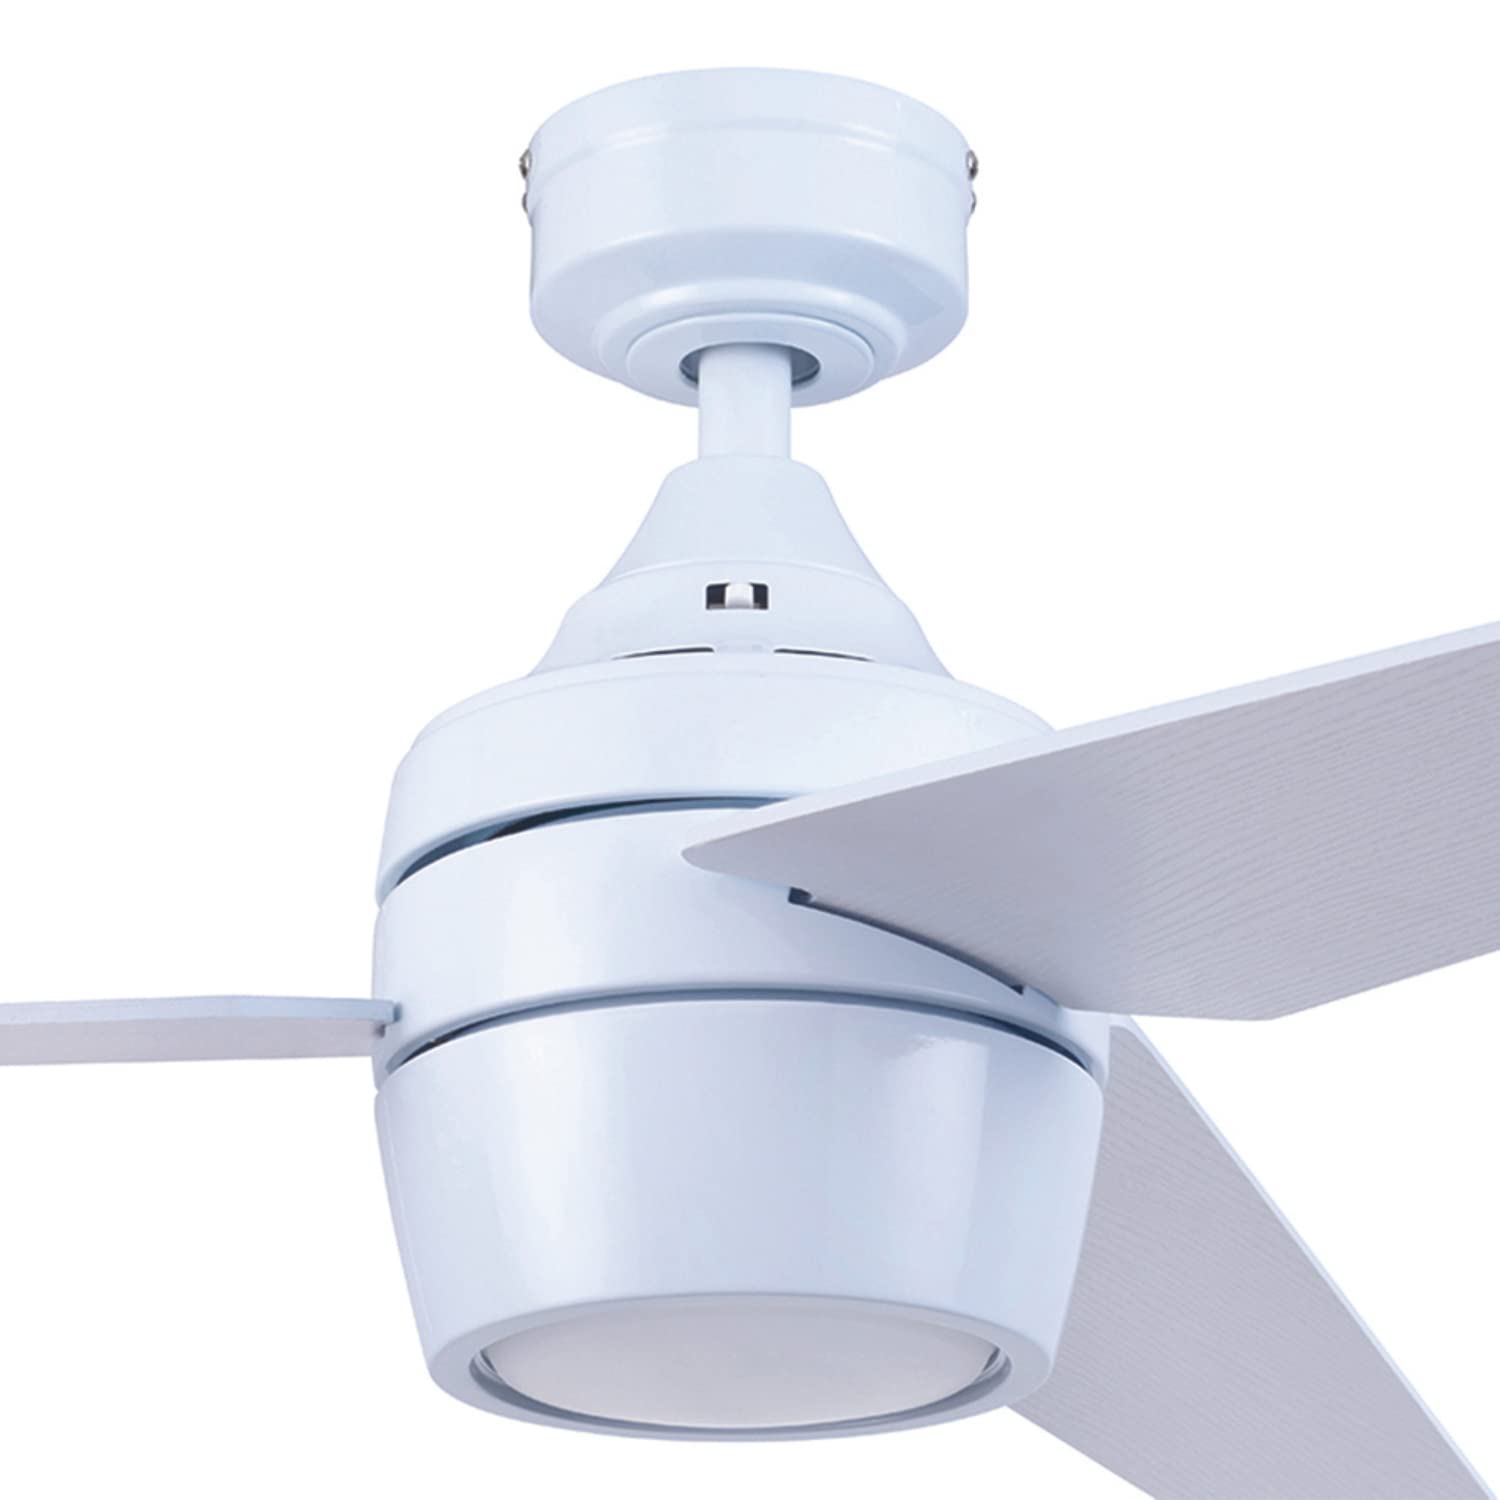 Honeywell Ceiling Fans Eamon, 52 Inch Modern Indoor LED Ceiling Fan with Light, Remote Control, Three Mounting Options, 3 Dual Finish Blades, Reversible Motor - 50605-01 (Bright White)